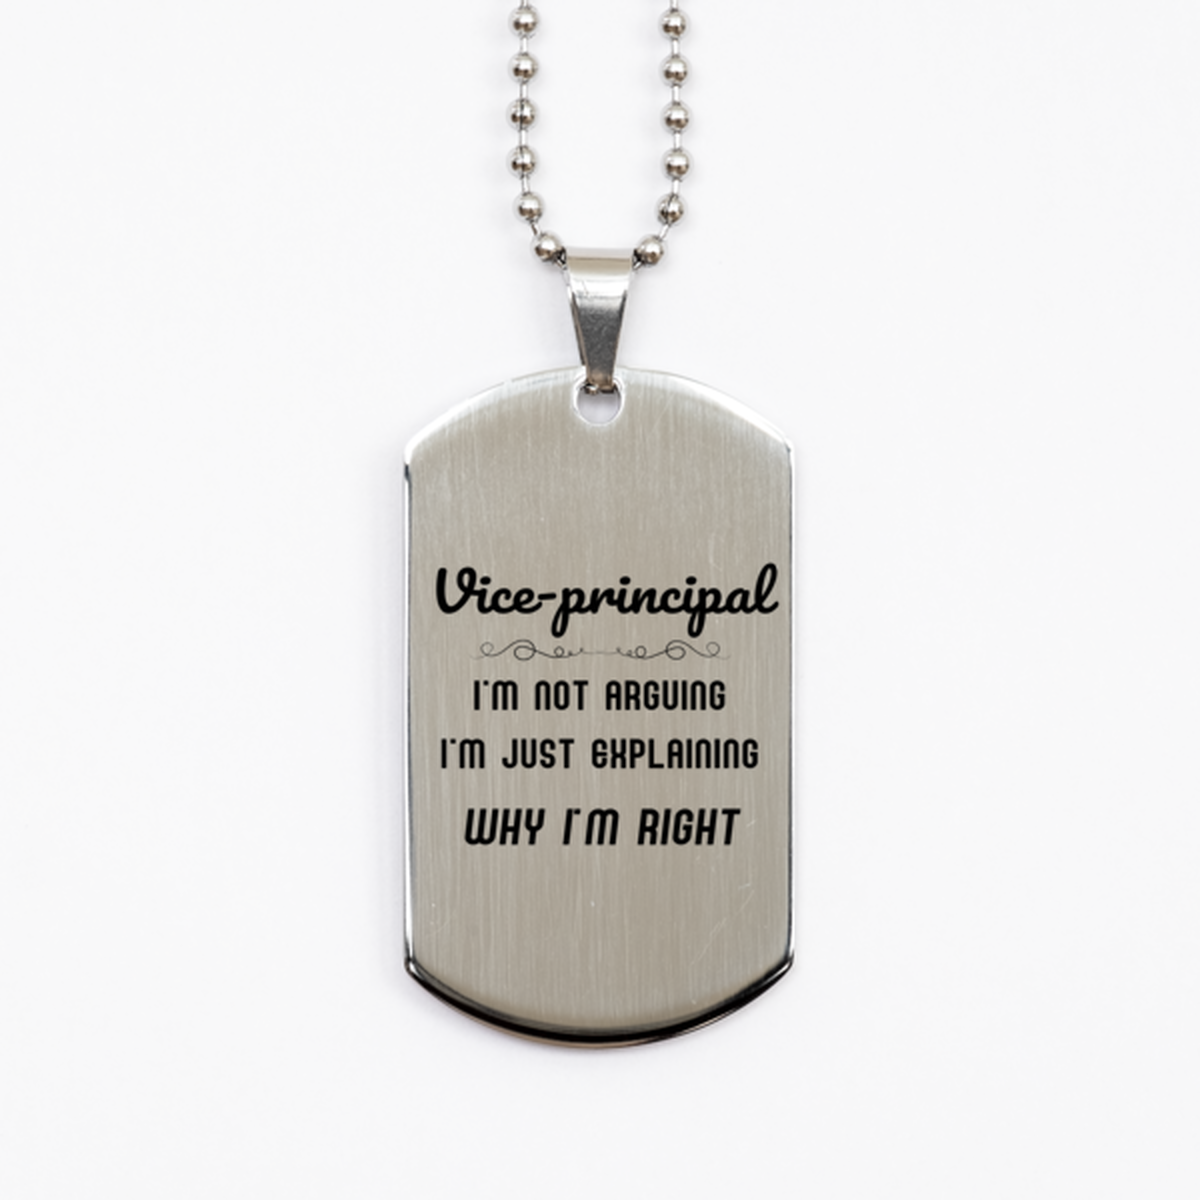 Vice-principal I'm not Arguing. I'm Just Explaining Why I'm RIGHT Silver Dog Tag, Funny Saying Quote Vice-principal Gifts For Vice-principal Graduation Birthday Christmas Gifts for Men Women Coworker